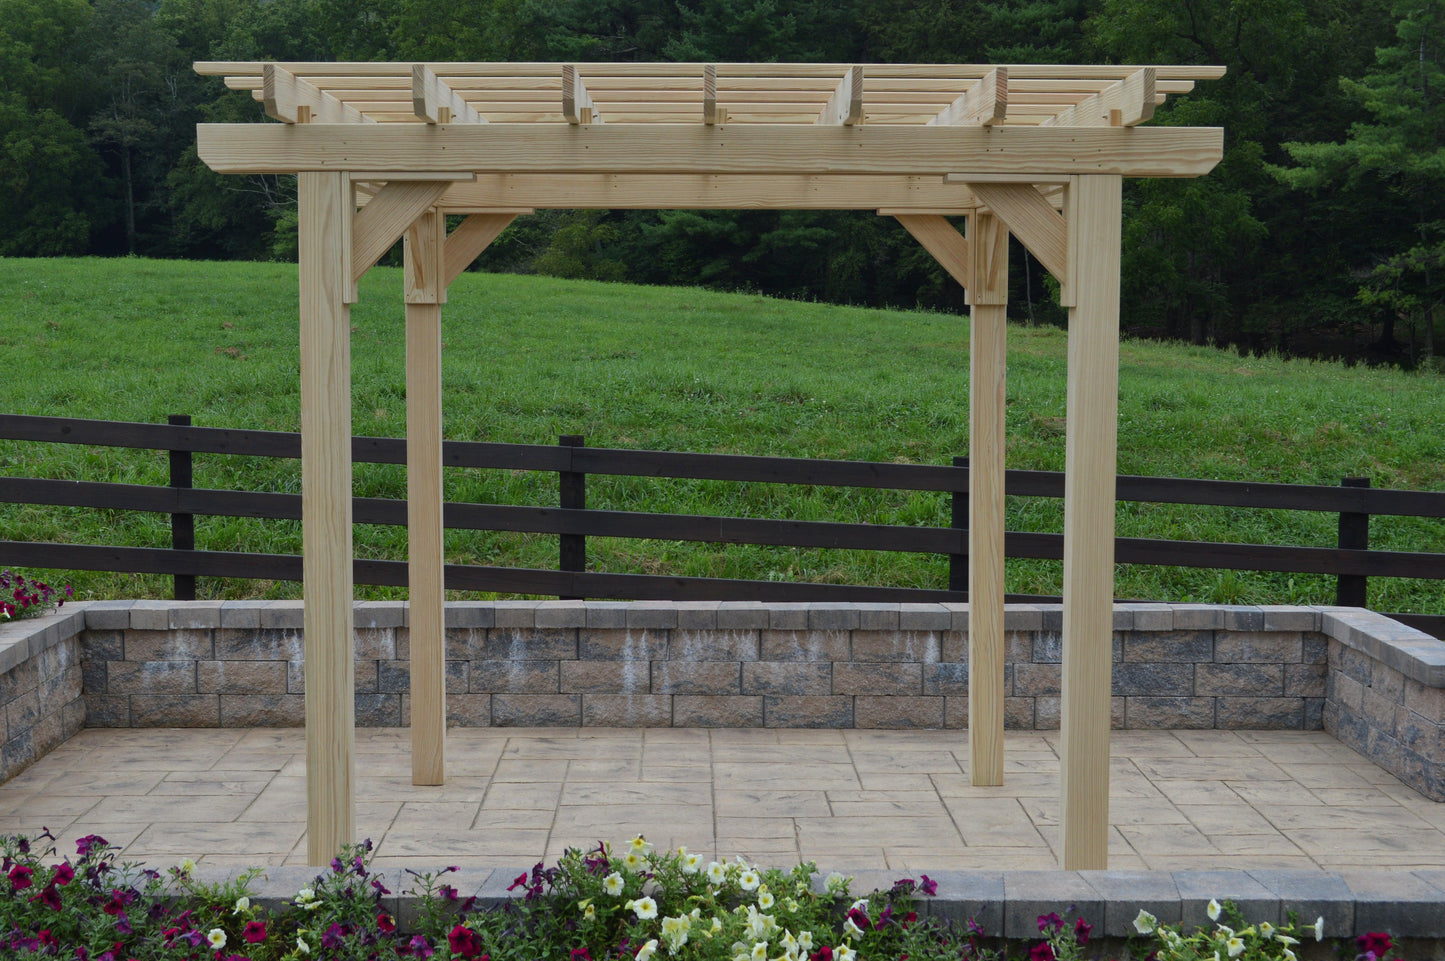 A&L Furniture Co. Pressure Treated Pine  6' x 8' Bradford Pergola with Swing Hangers - LEAD TIME TO SHIP 10 BUSINESS DAYS